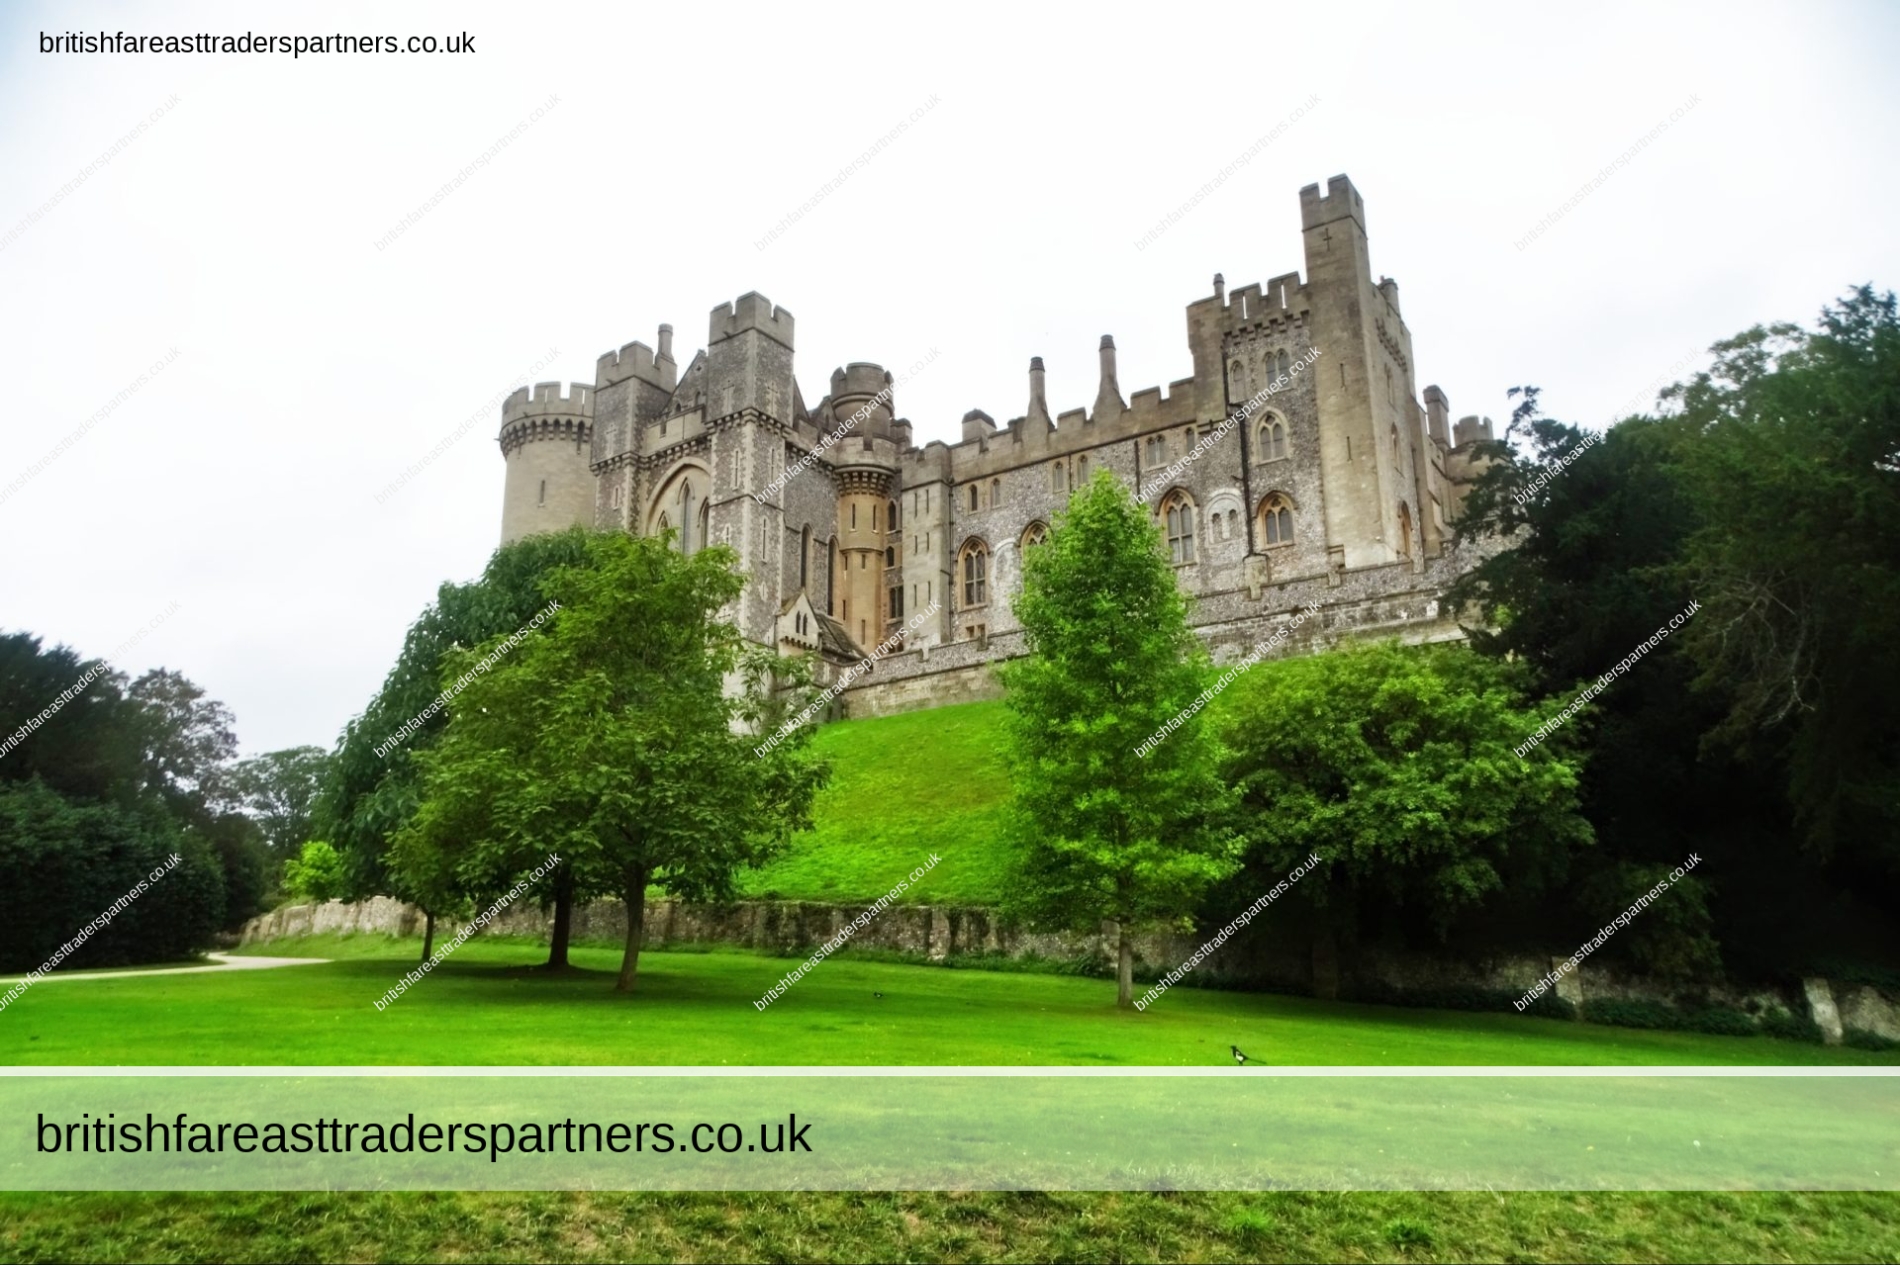 DAYS OUT IN UNITED KINGDOM: PLACES OF INTEREST in WEST SUSSEX, ENGLAND: A SERIES OF PHOTOGRAPHIC BLOG: ARUNDEL CASTLE GROUNDS & ARUNDEL CASTLE WATER GARDEN : A WORLD HERITAGE SITE : HERITAGE | ART | HISTORY | TOPOGRAPHY | TOURISM | TRAVEL | ARCHITECTURE | ARISTOCRACY | CULTURE